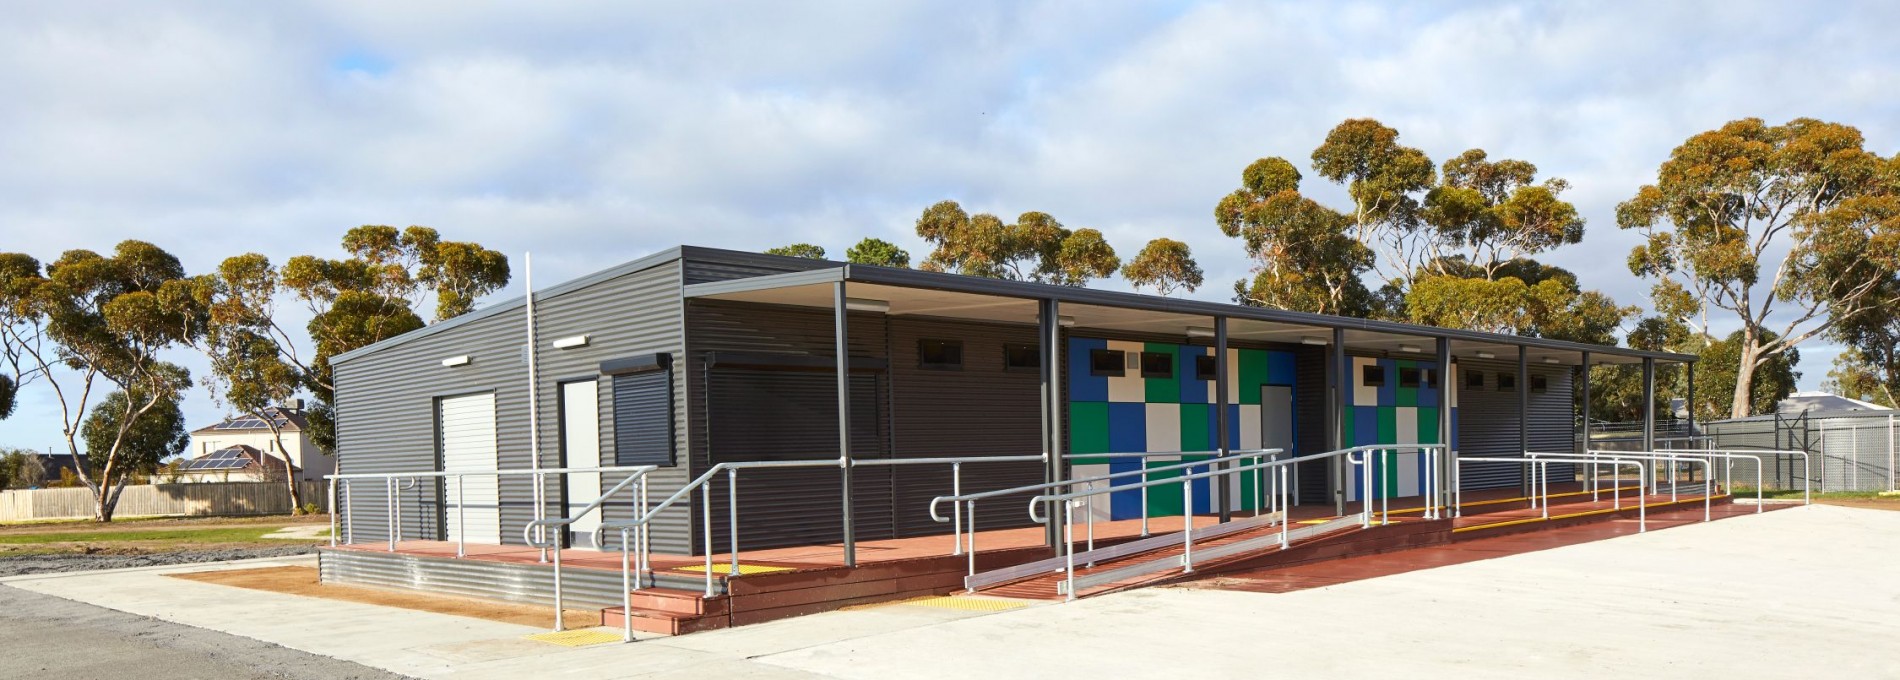 Exterior of Sports Buildings with Wheelchair Ramp